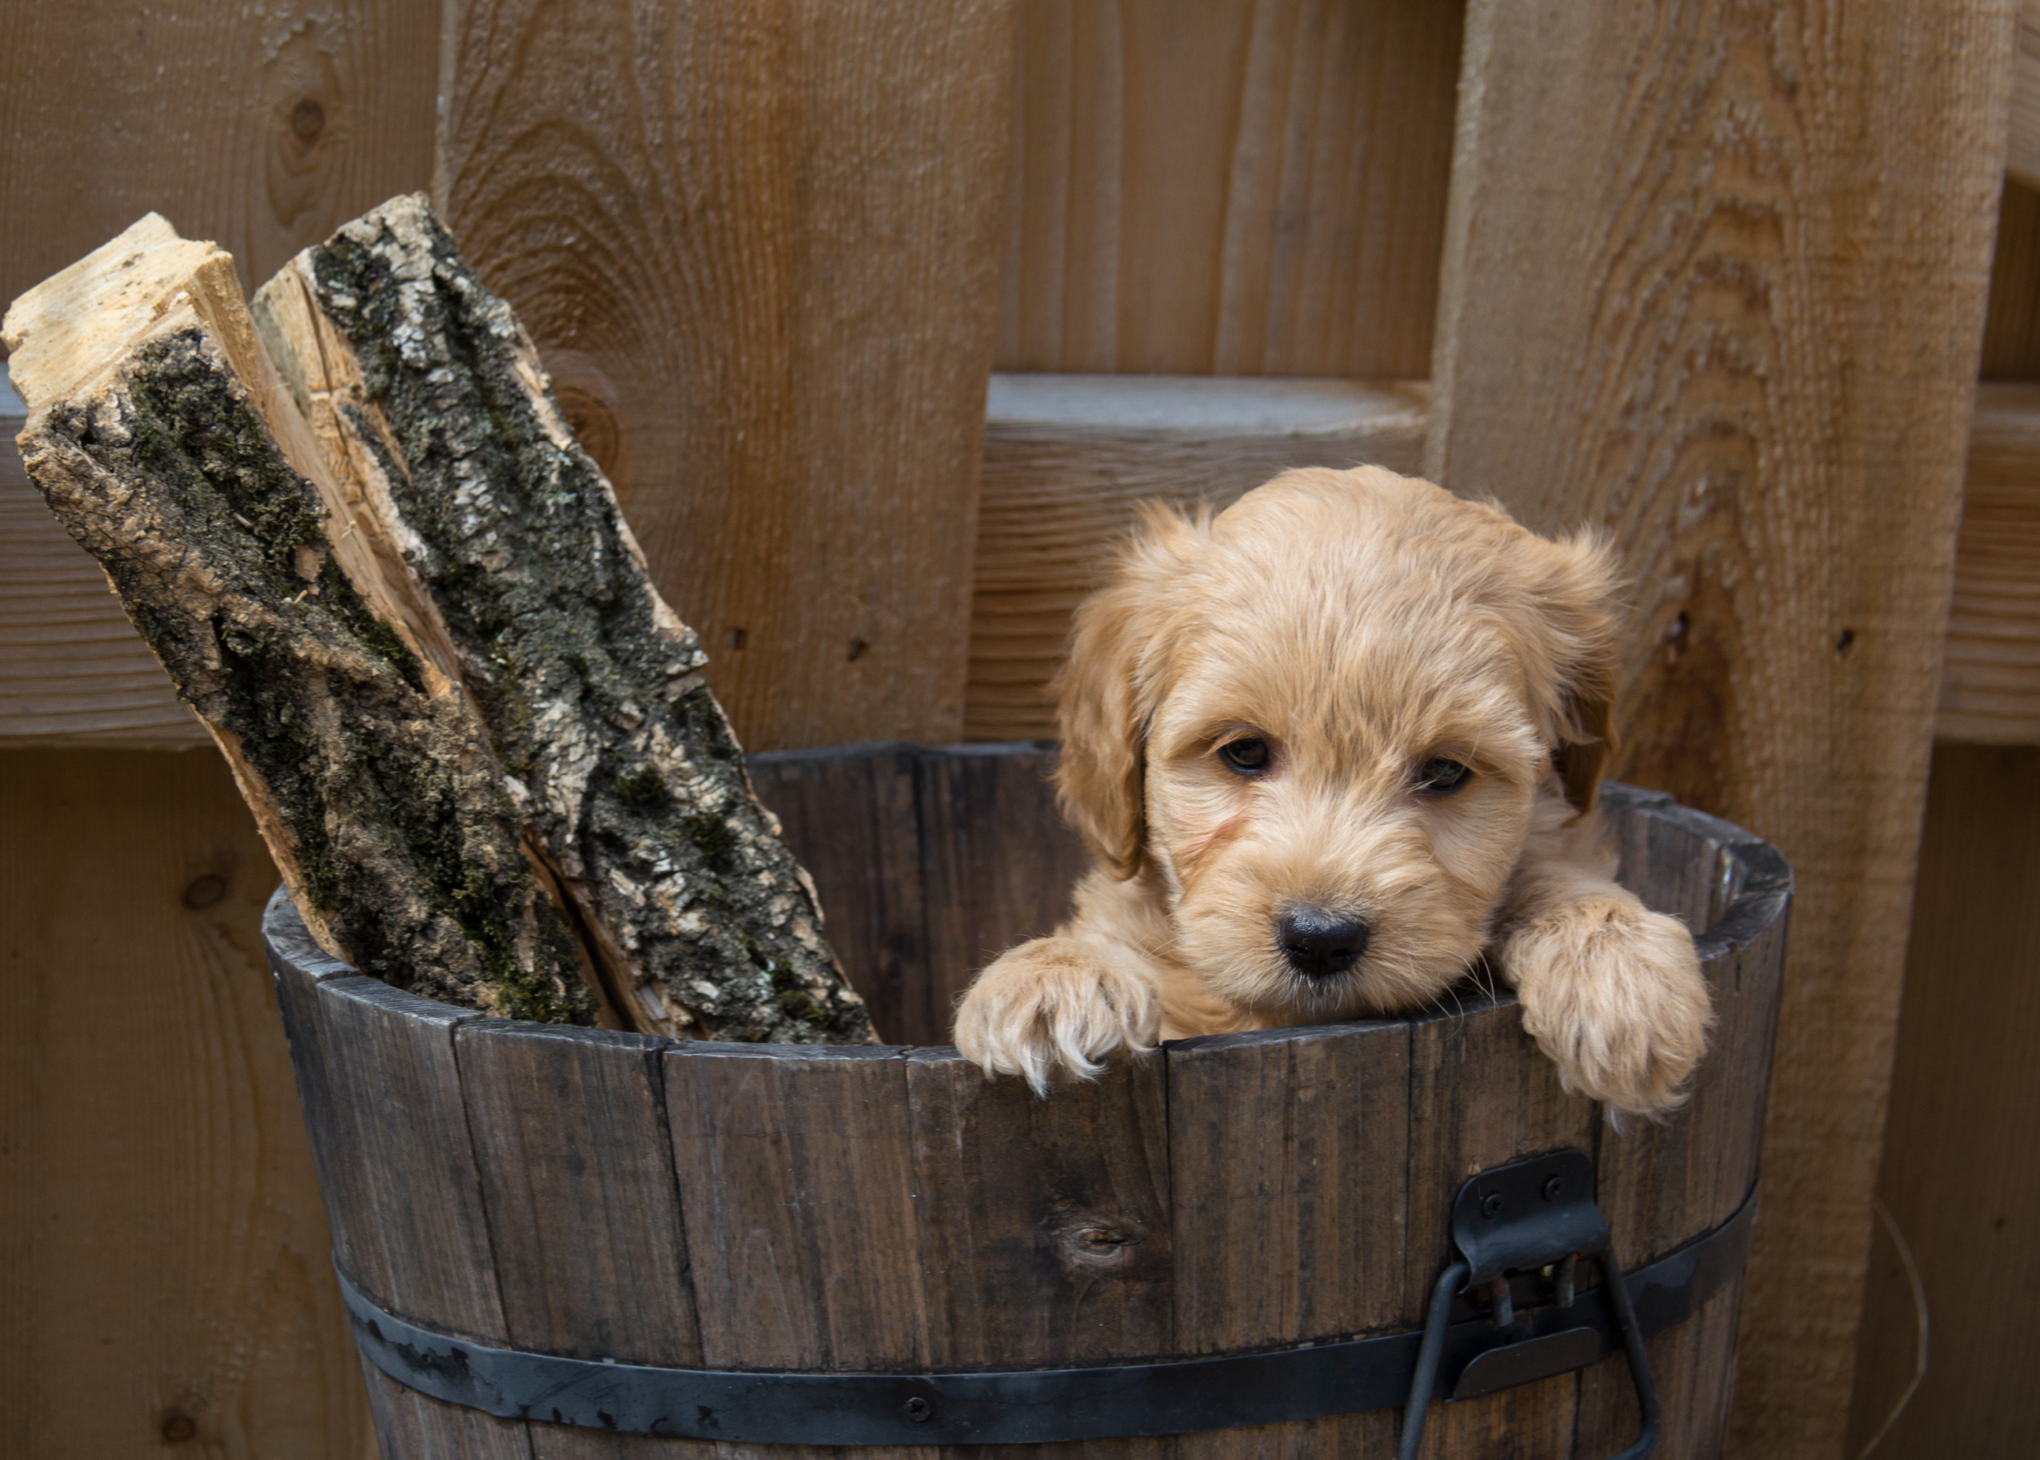 10 wonderful Mini Goldendoodle Toys your puppies will Love!